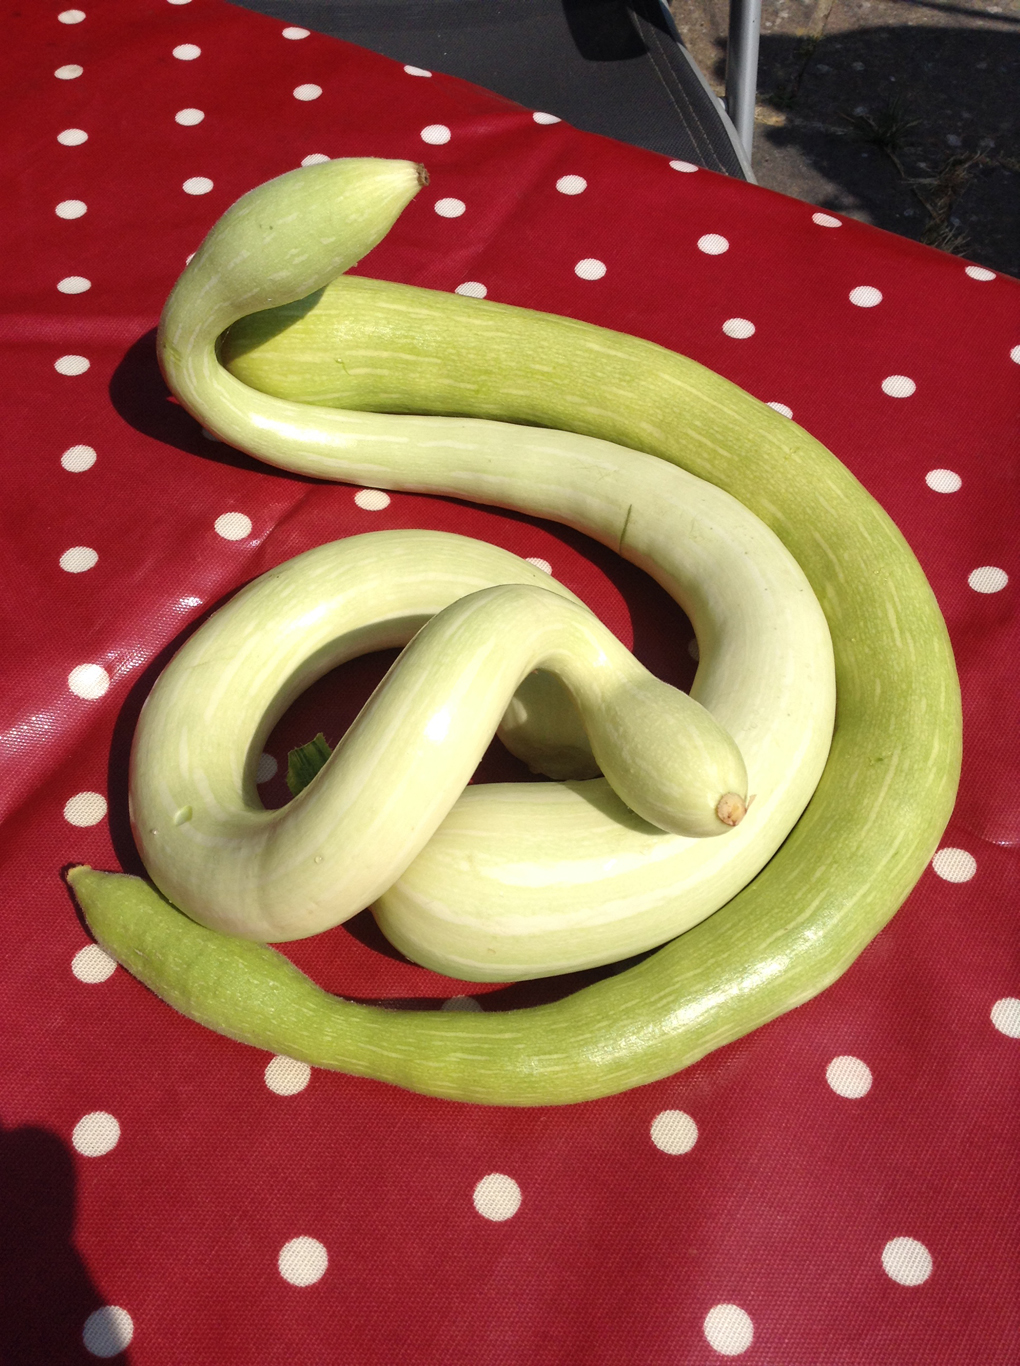 This are courgettes that look like a cobra